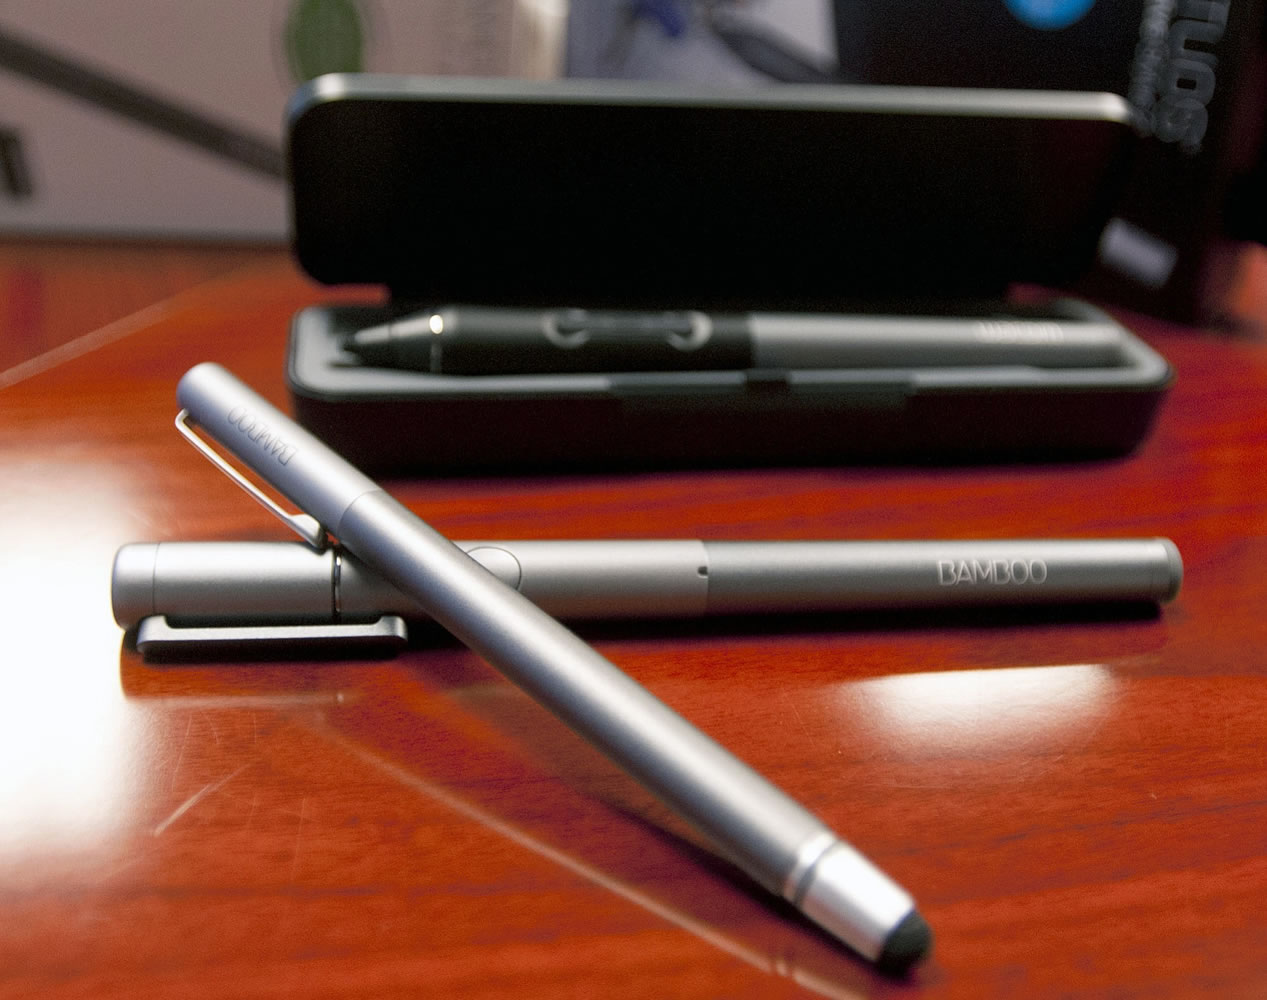 Three of Wacom's styli are shown here, including the new Intuos Creative 2, at rear.